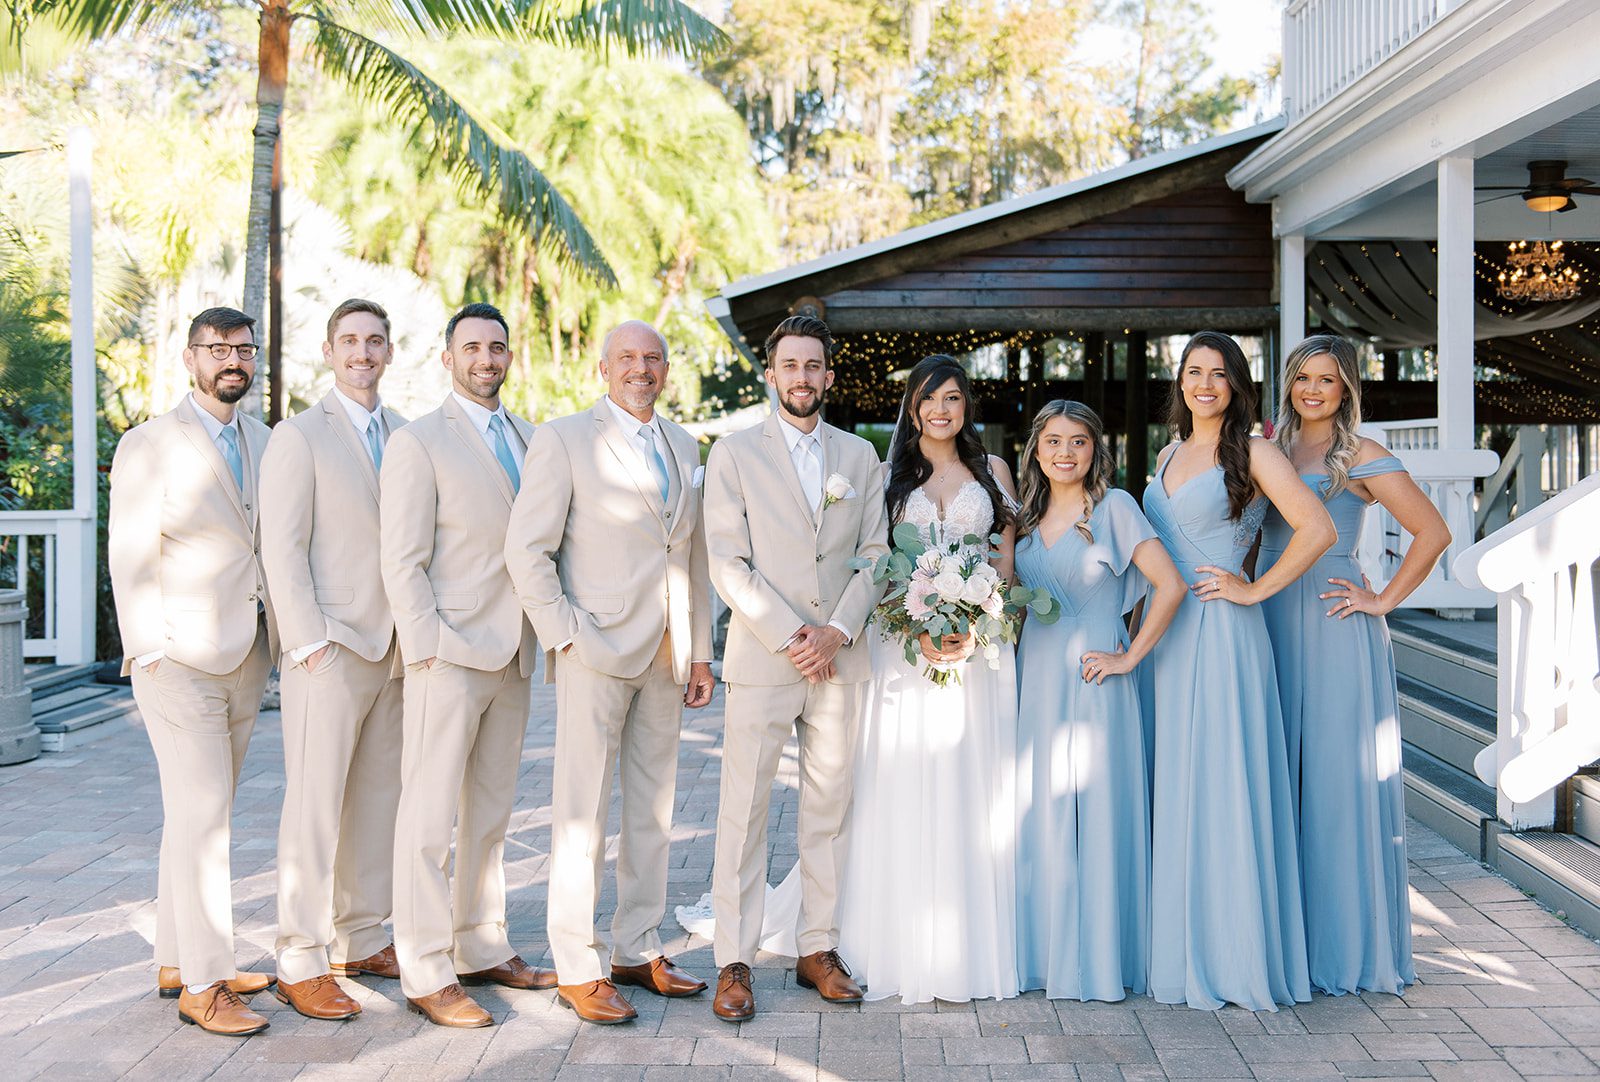 bridal party at a St. Petersburg wedding venue smiling and posing for an outdoor wedding in FLorida, Wedding Vendors Search Etiquette